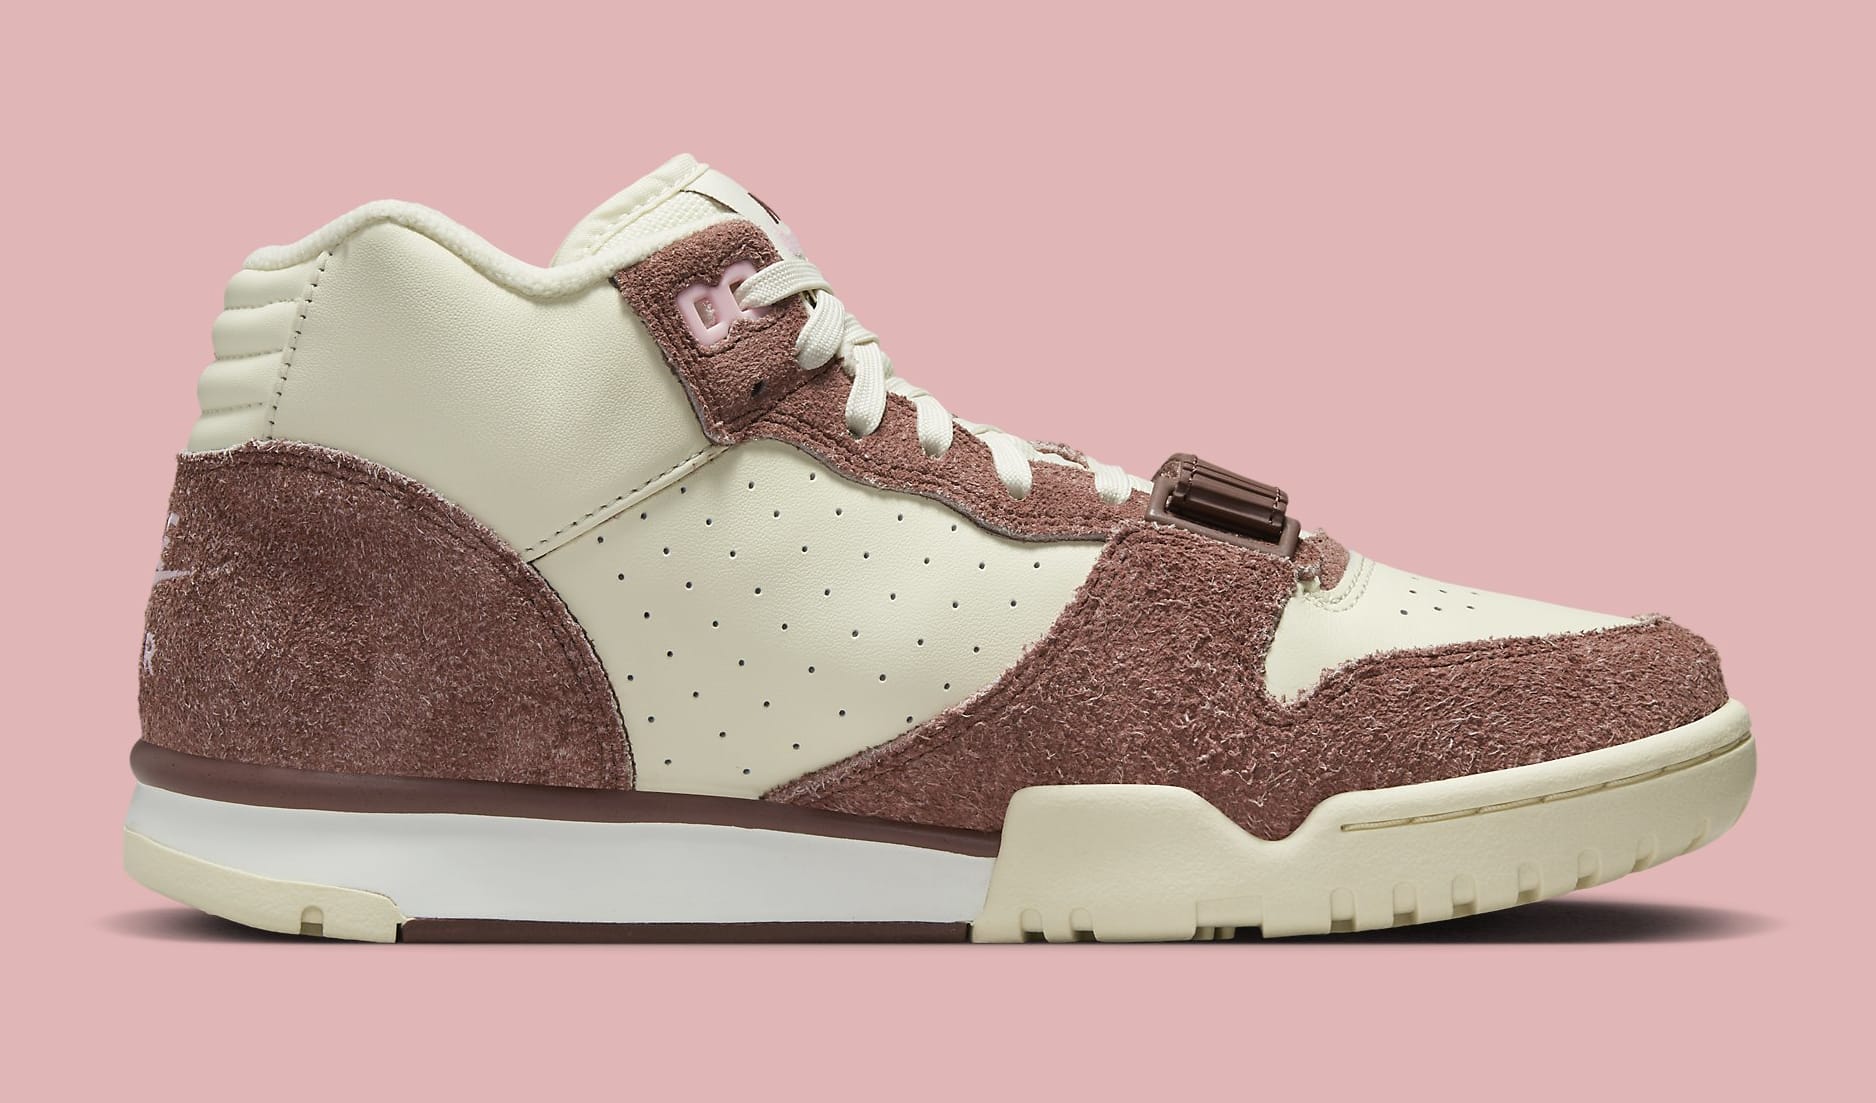 Nike Air Trainer 1 'Valentine's Day 2023' DM0522 201 Medial